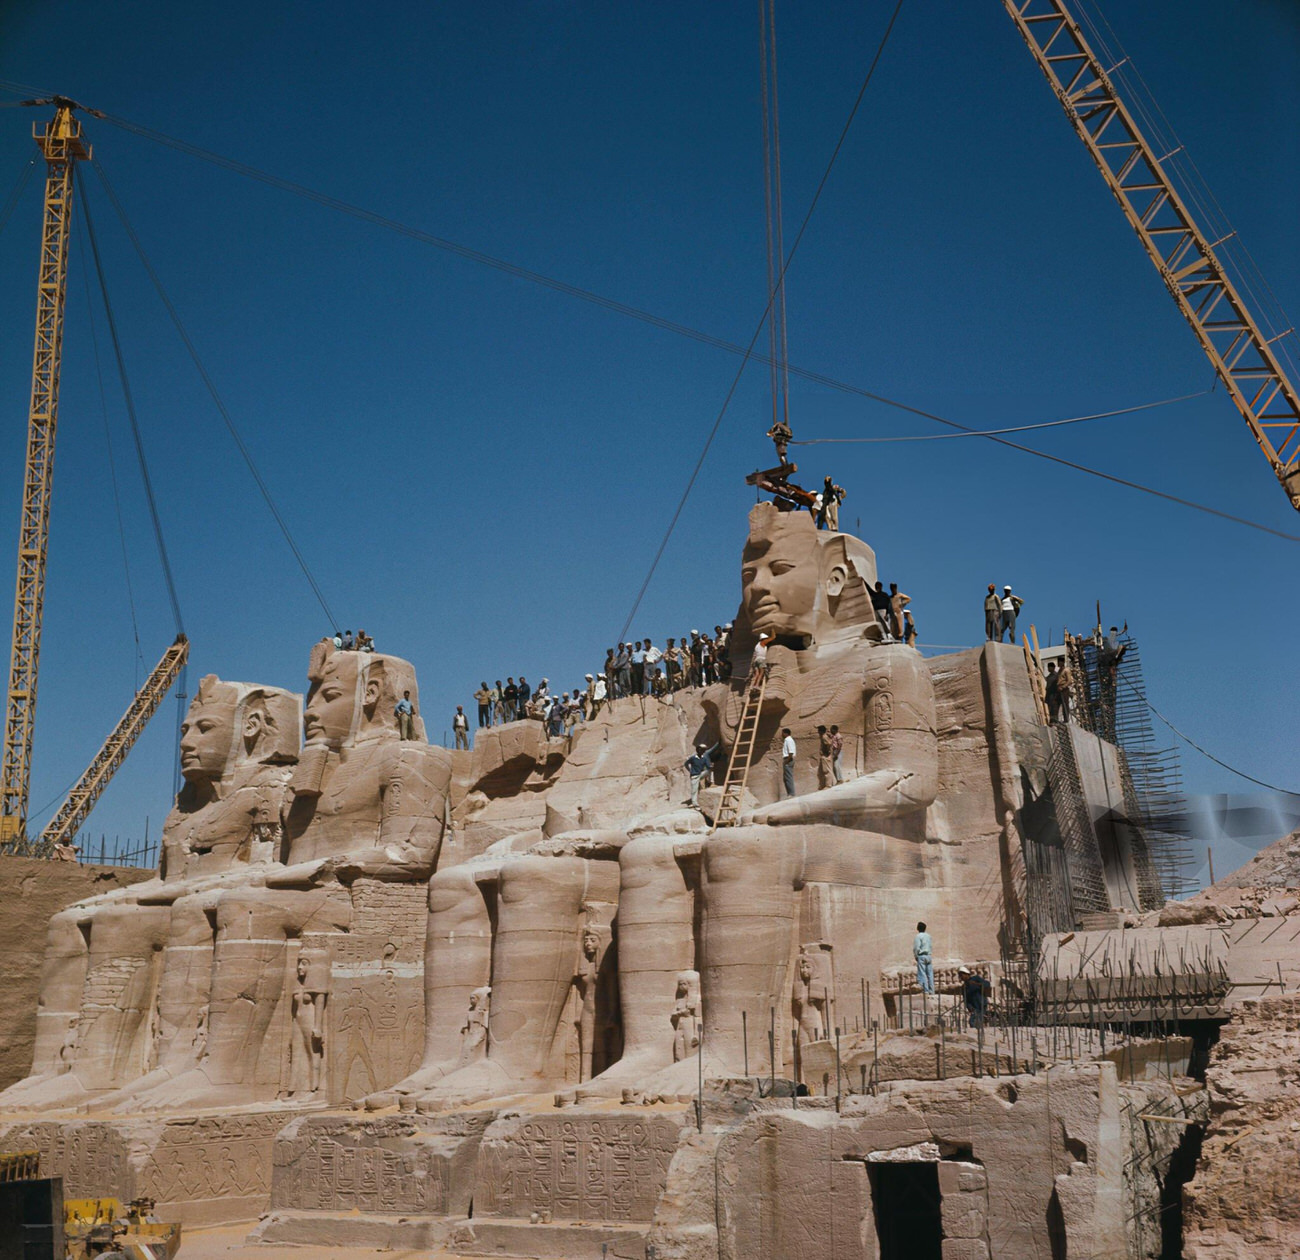 The disassembly of Pharaoh Ramesses II's statues at Abu Simbel in 1964 for relocation to avoid Nile flooding from the Aswan High Dam.